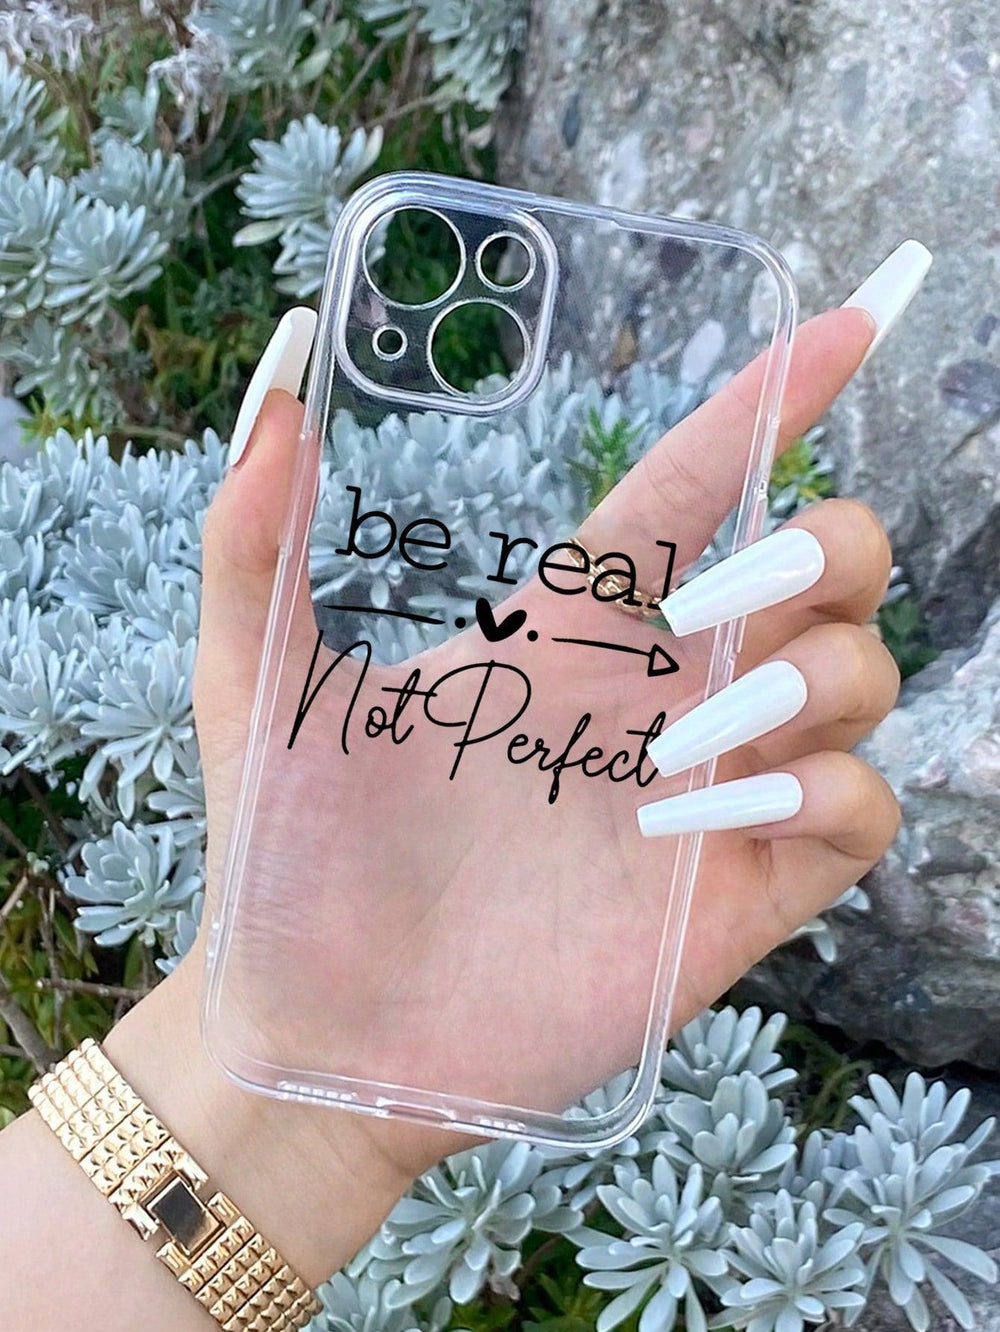 Real Quote Graphic Clear Phone Case - Brand My Case